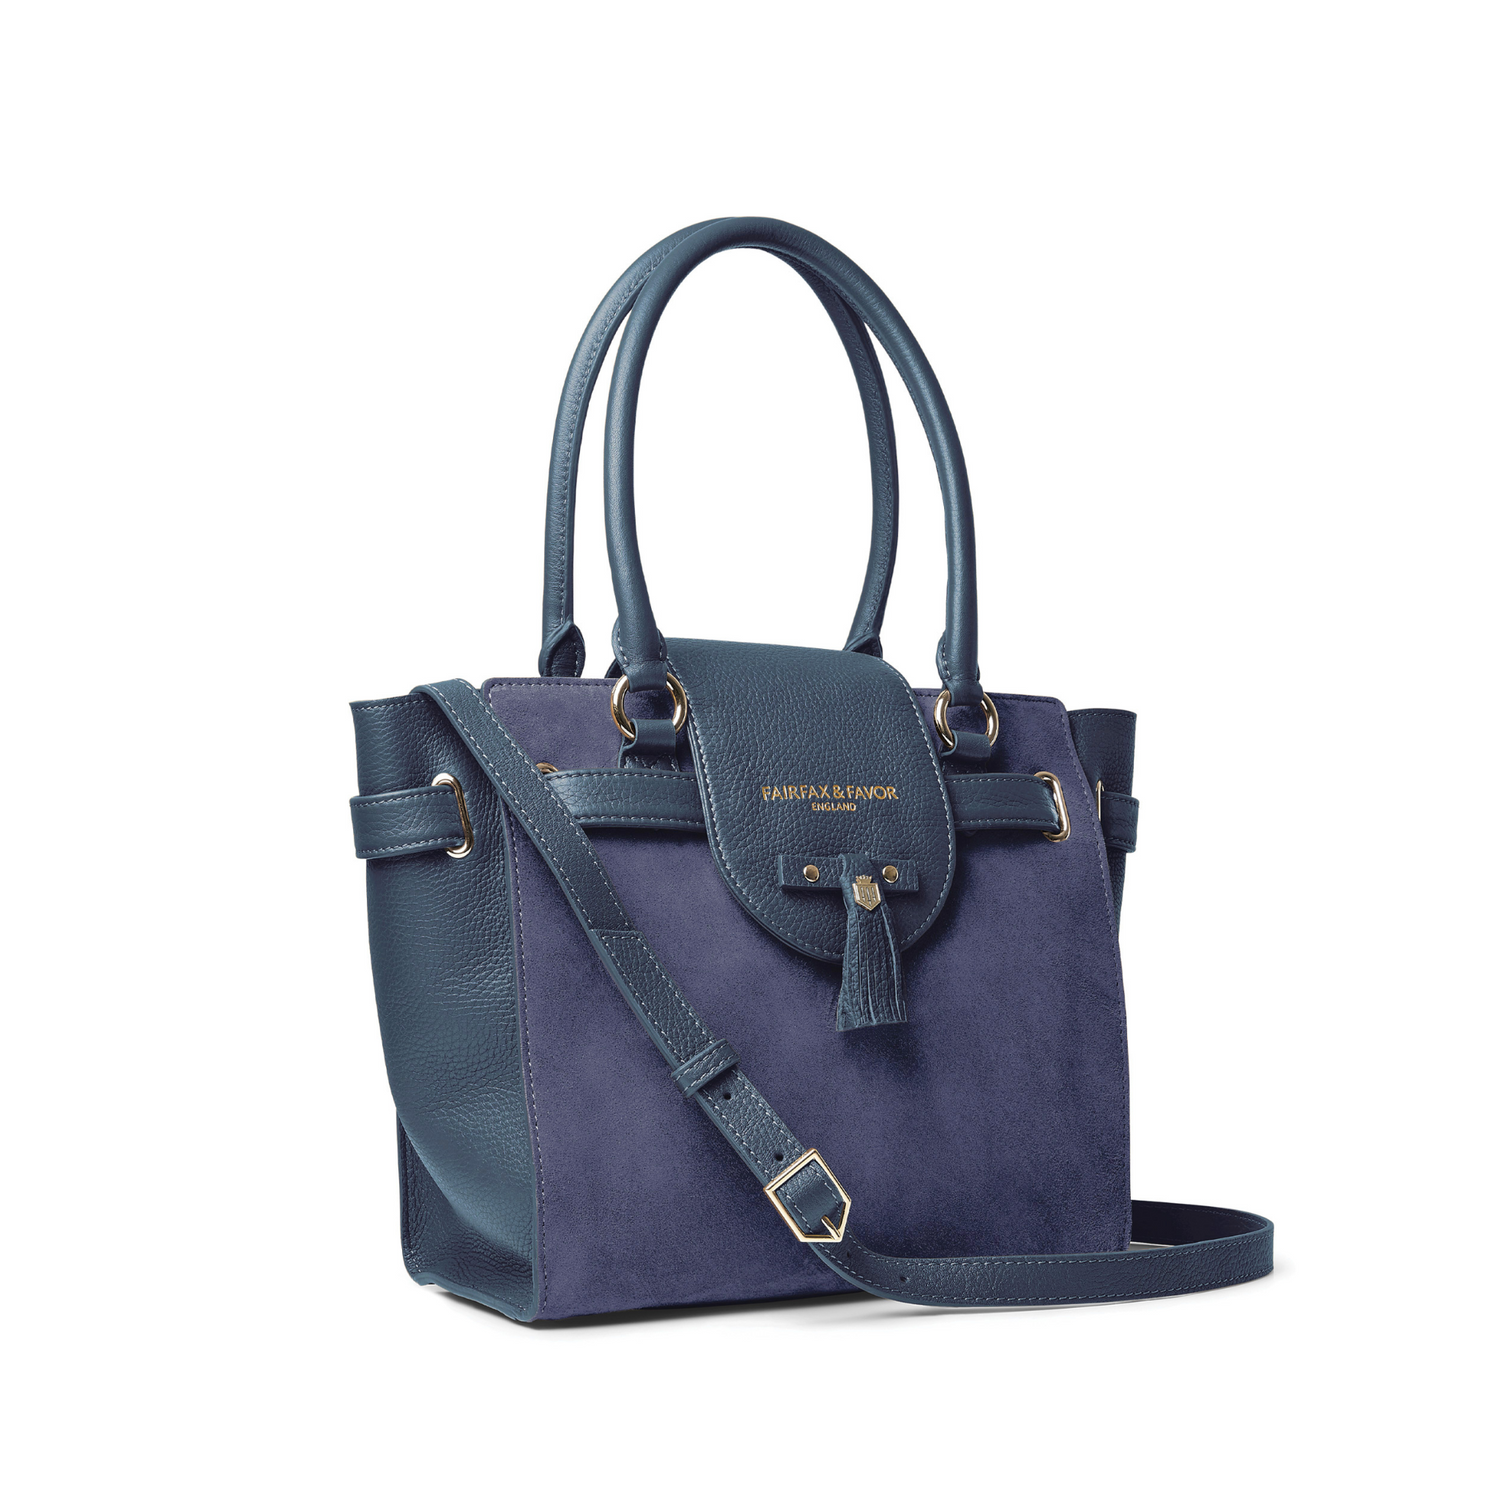 The Windsor Tote Ink Suede